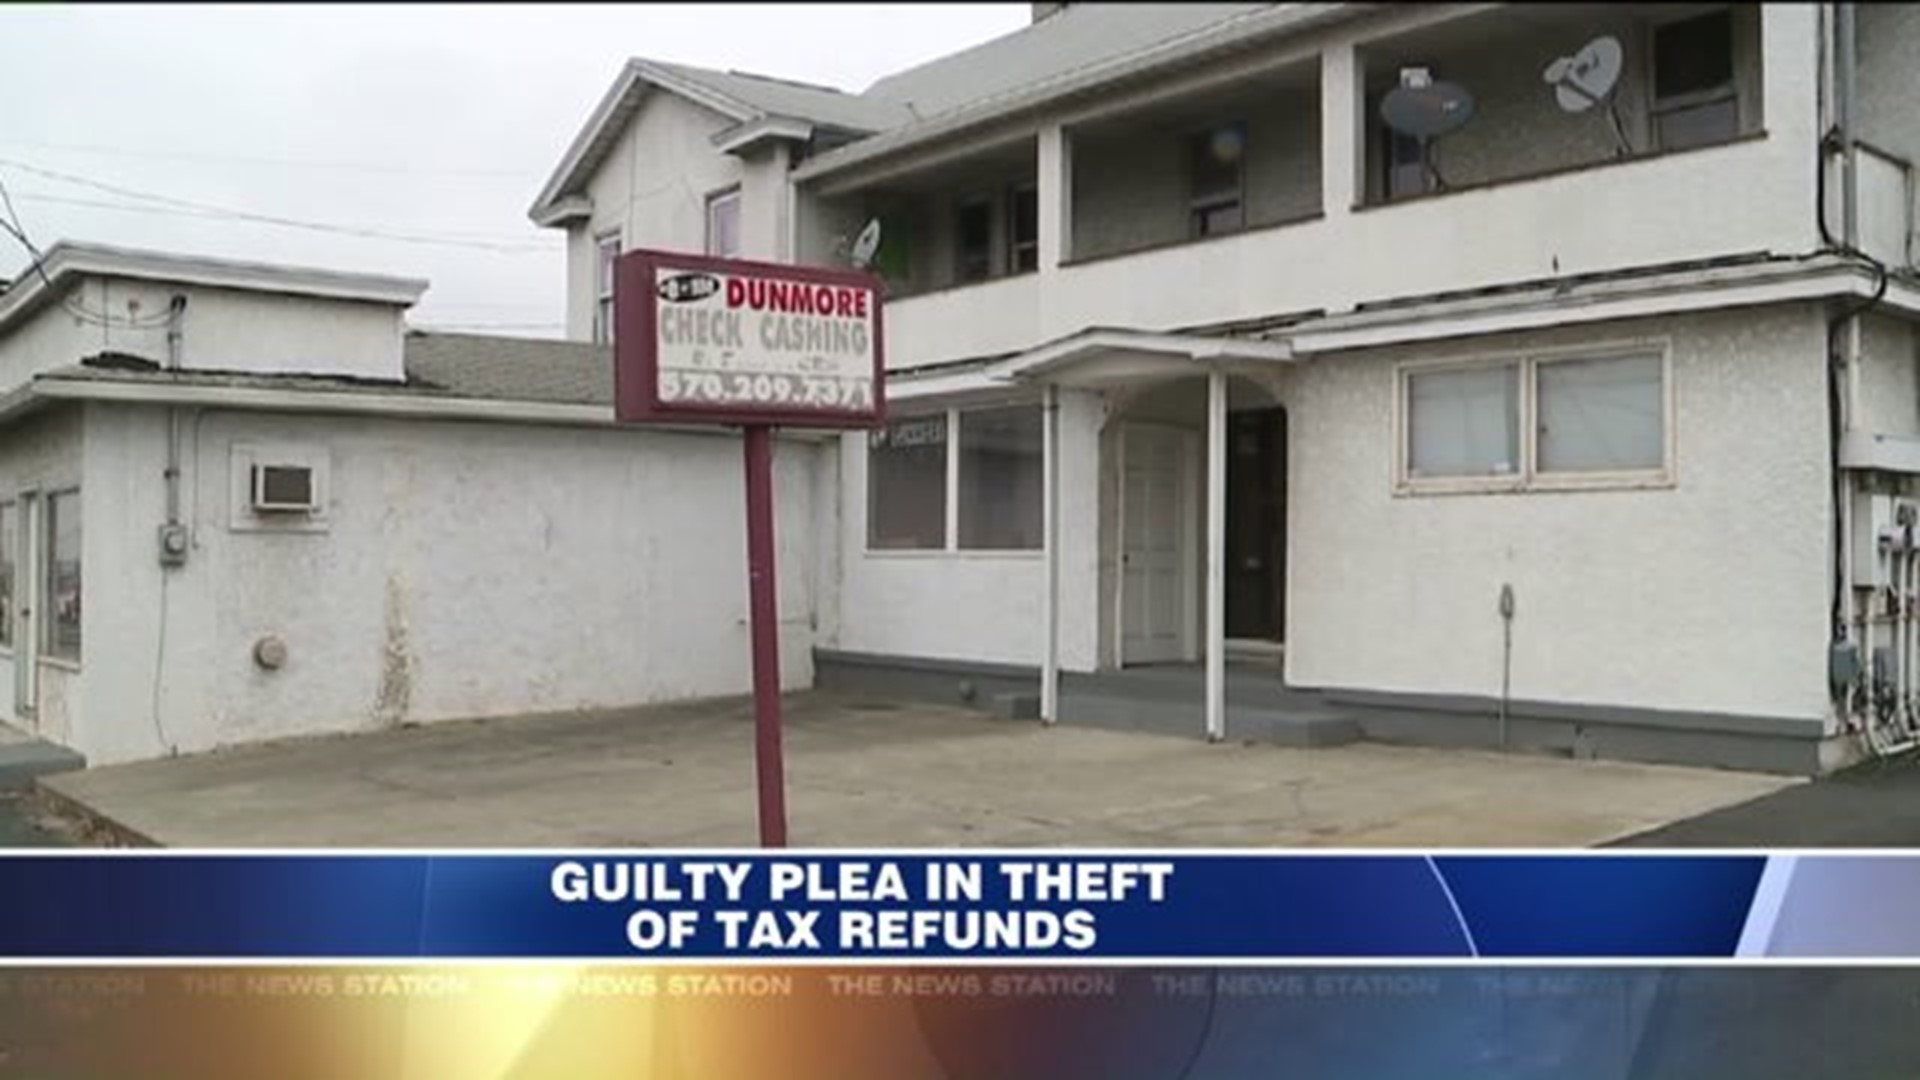 Dunmore Man Pleads Guilty in Theft of Tax Refunds